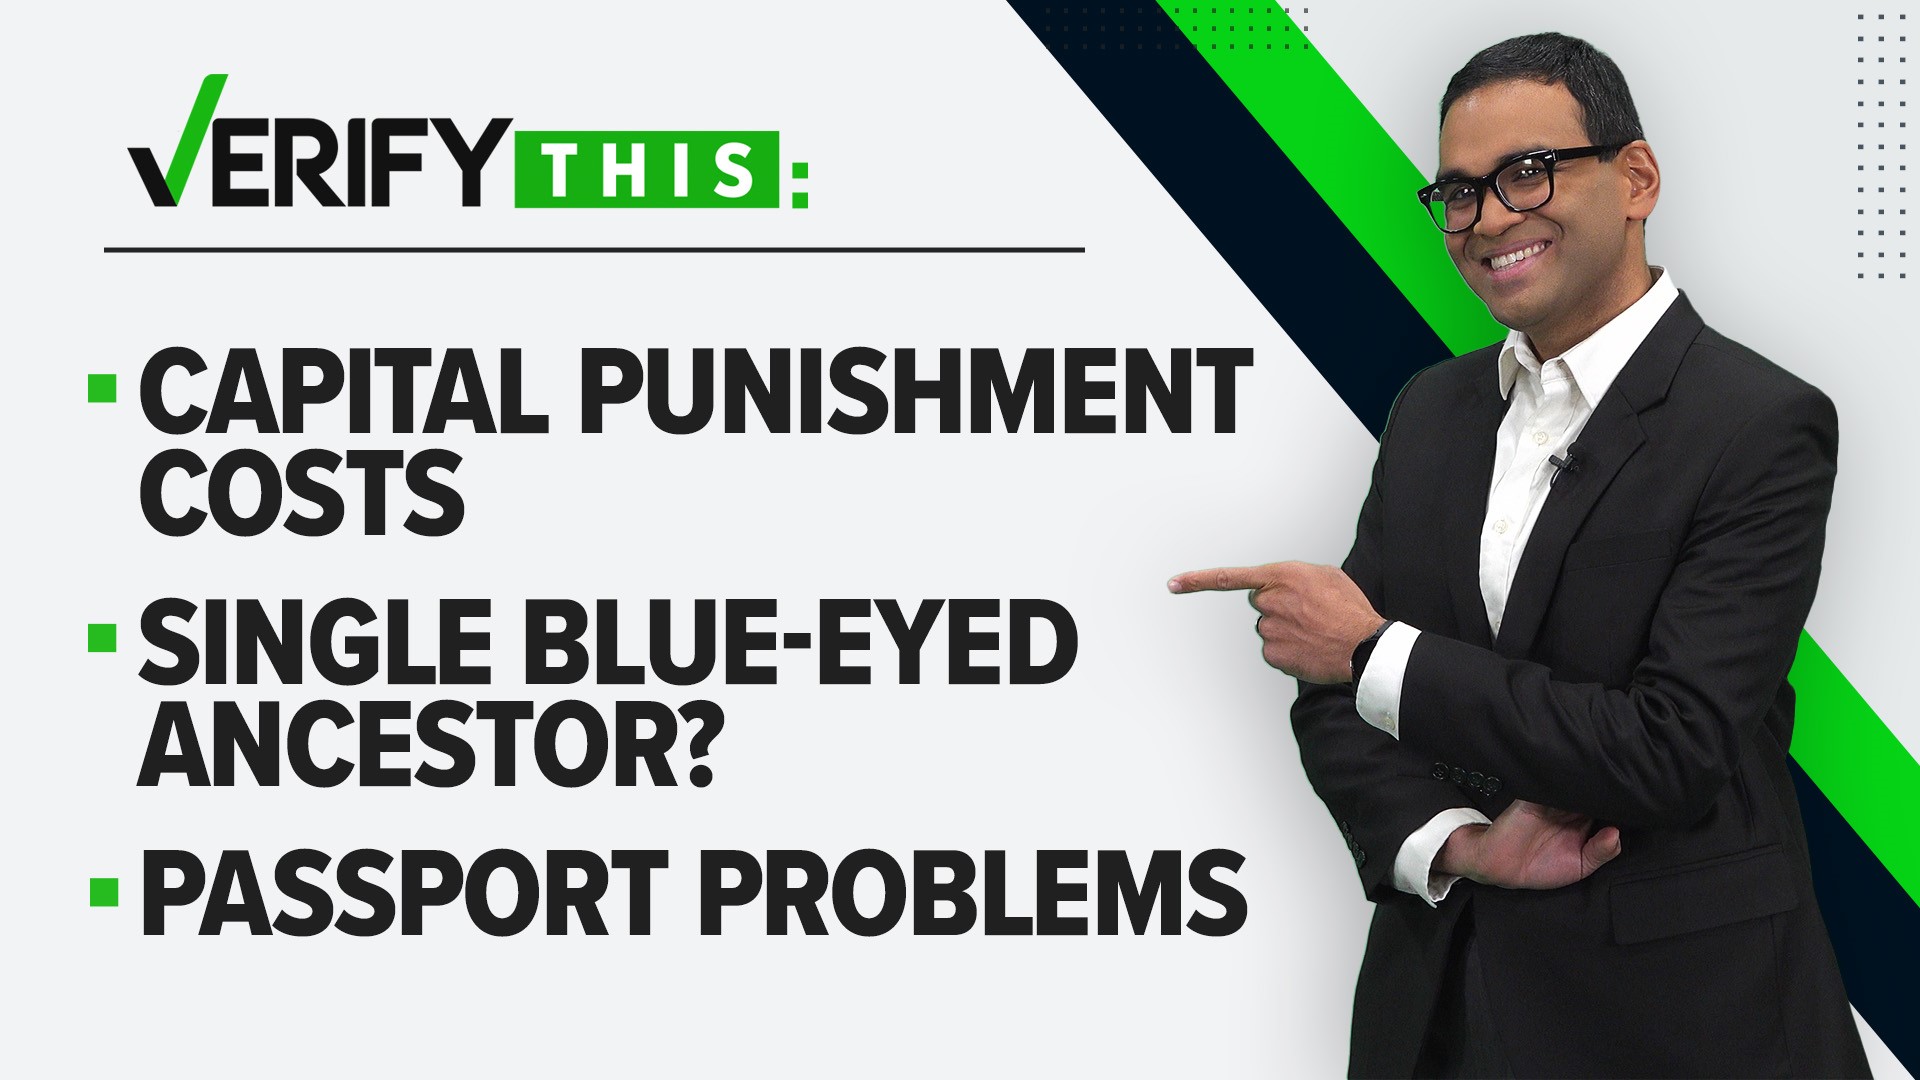 The VerifyThis team takes a look at capital punishment costs, passport problems and does everyone with blue eyes have the same ancestor?